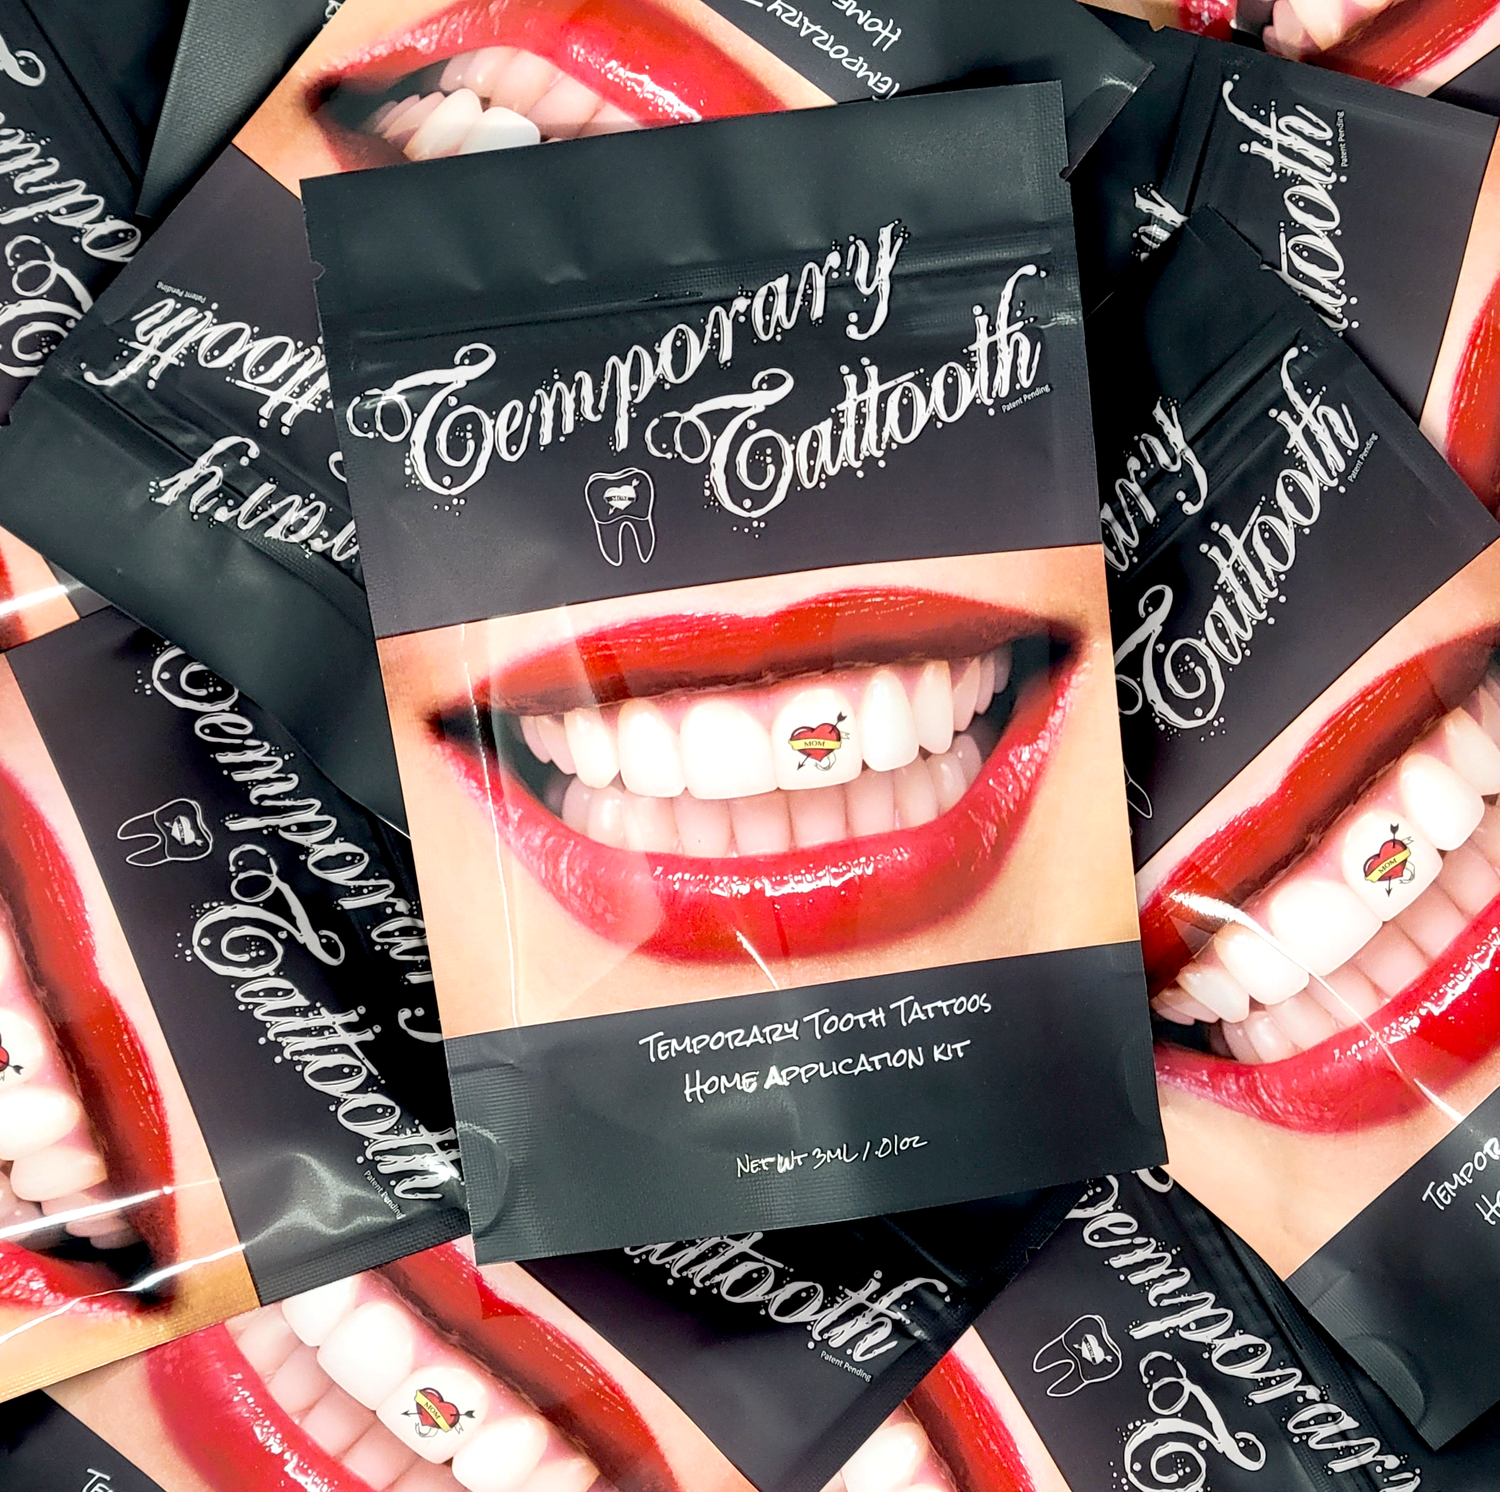 A Temporary Tooth Tattoo Home Application Kit.  People can apply Temporary Tattooths at home with this Tooth Tattoo kit!